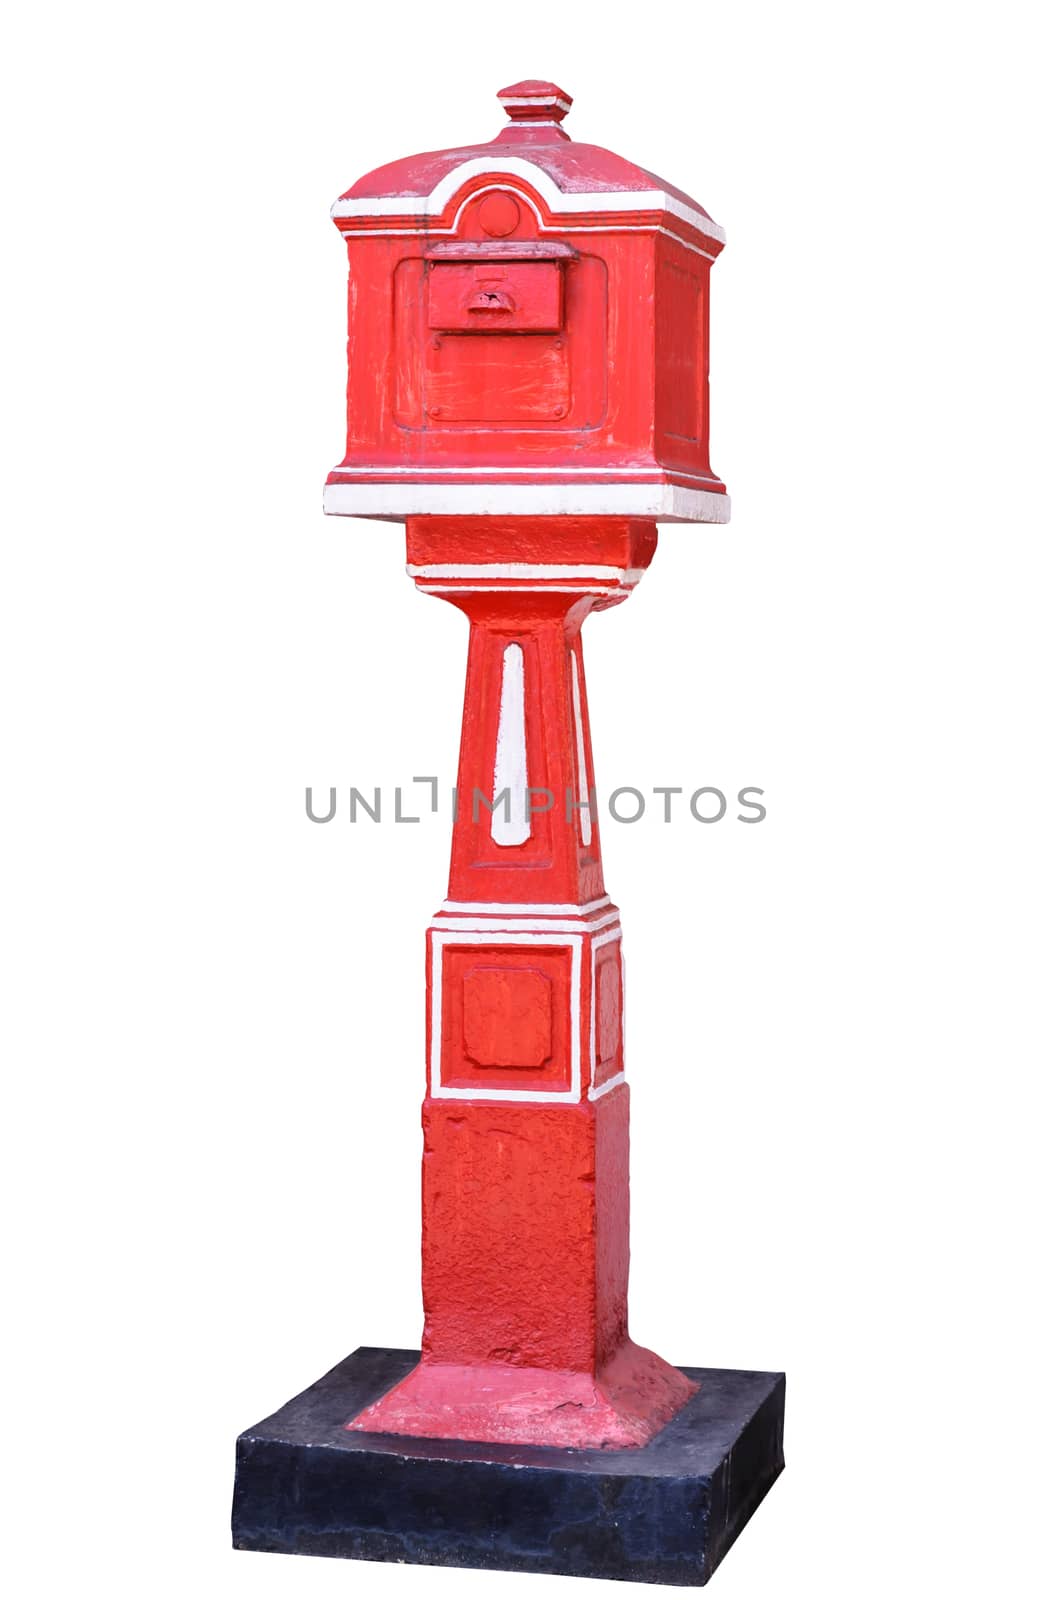 Red old-fashioned mailbox isolated on white background with clipping path